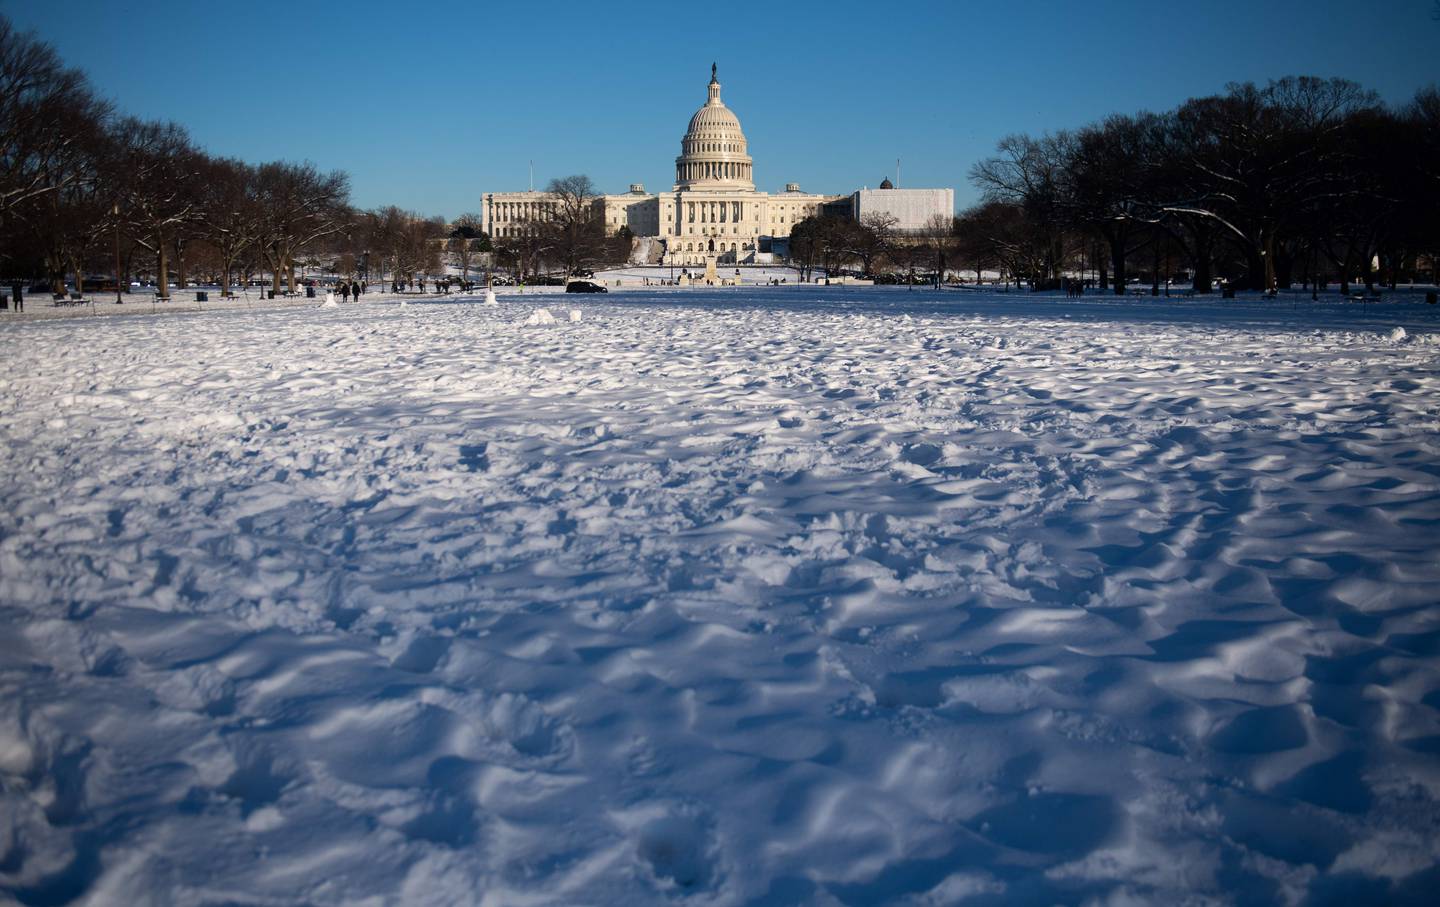 The US Capitol in Washington, DC, January 14, 2019, is seen following a snowstorm. (Photo by SAUL LOEB / AFP)